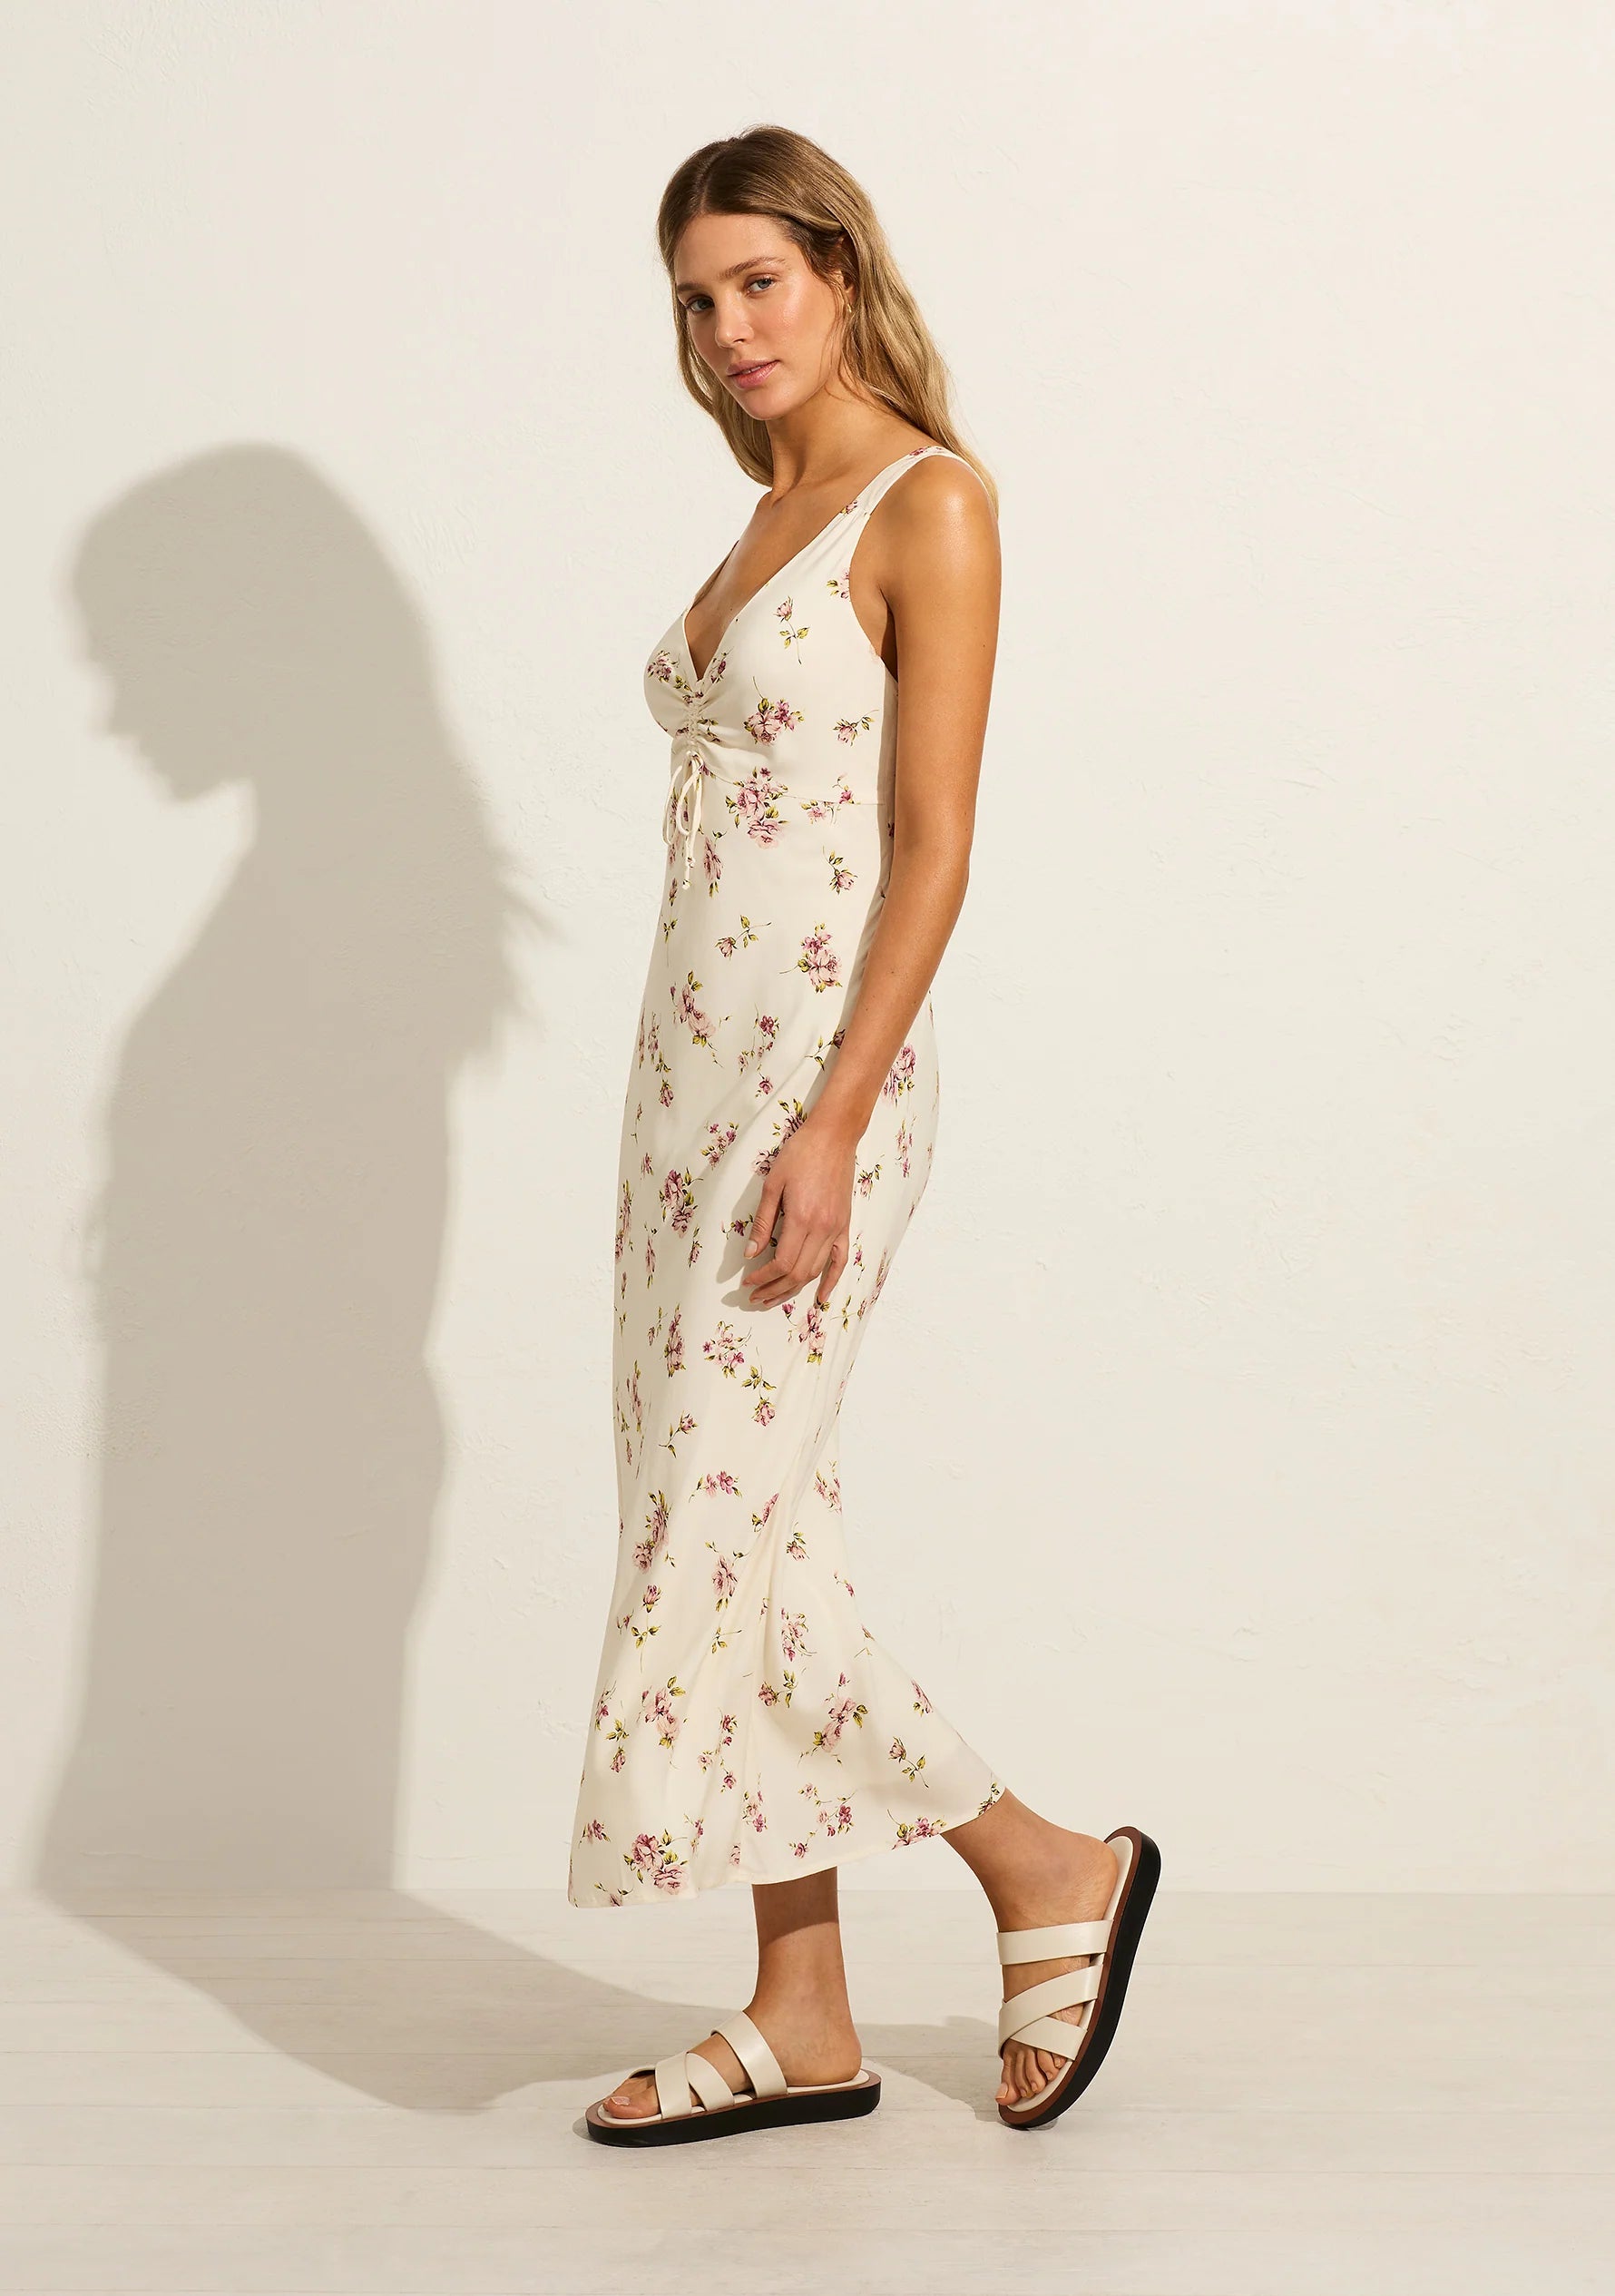 The Melodie Midi Dress in our much loved Isla print features a V neckline with gathered drawstring detail, wide fixed straps, and a flattering bias-cut silhouette that gracefully falls to a draped hem.